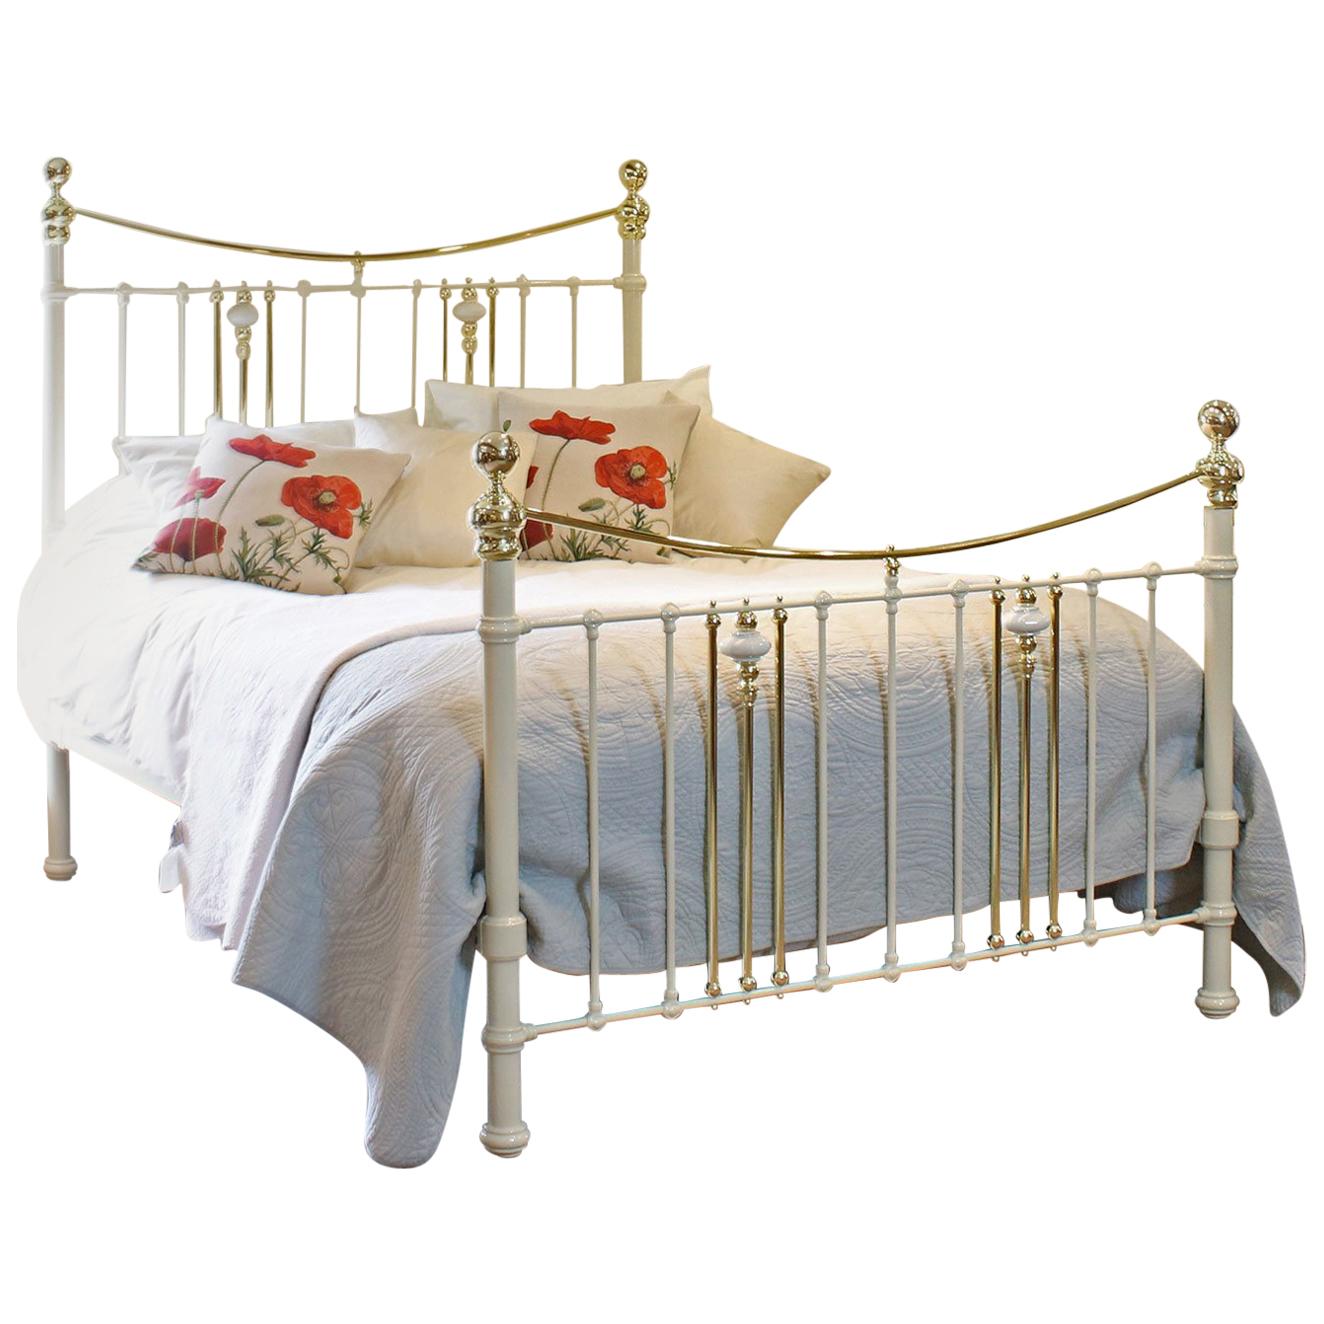 Cream Brass and Iron Bedstead with China Decorations, MK157